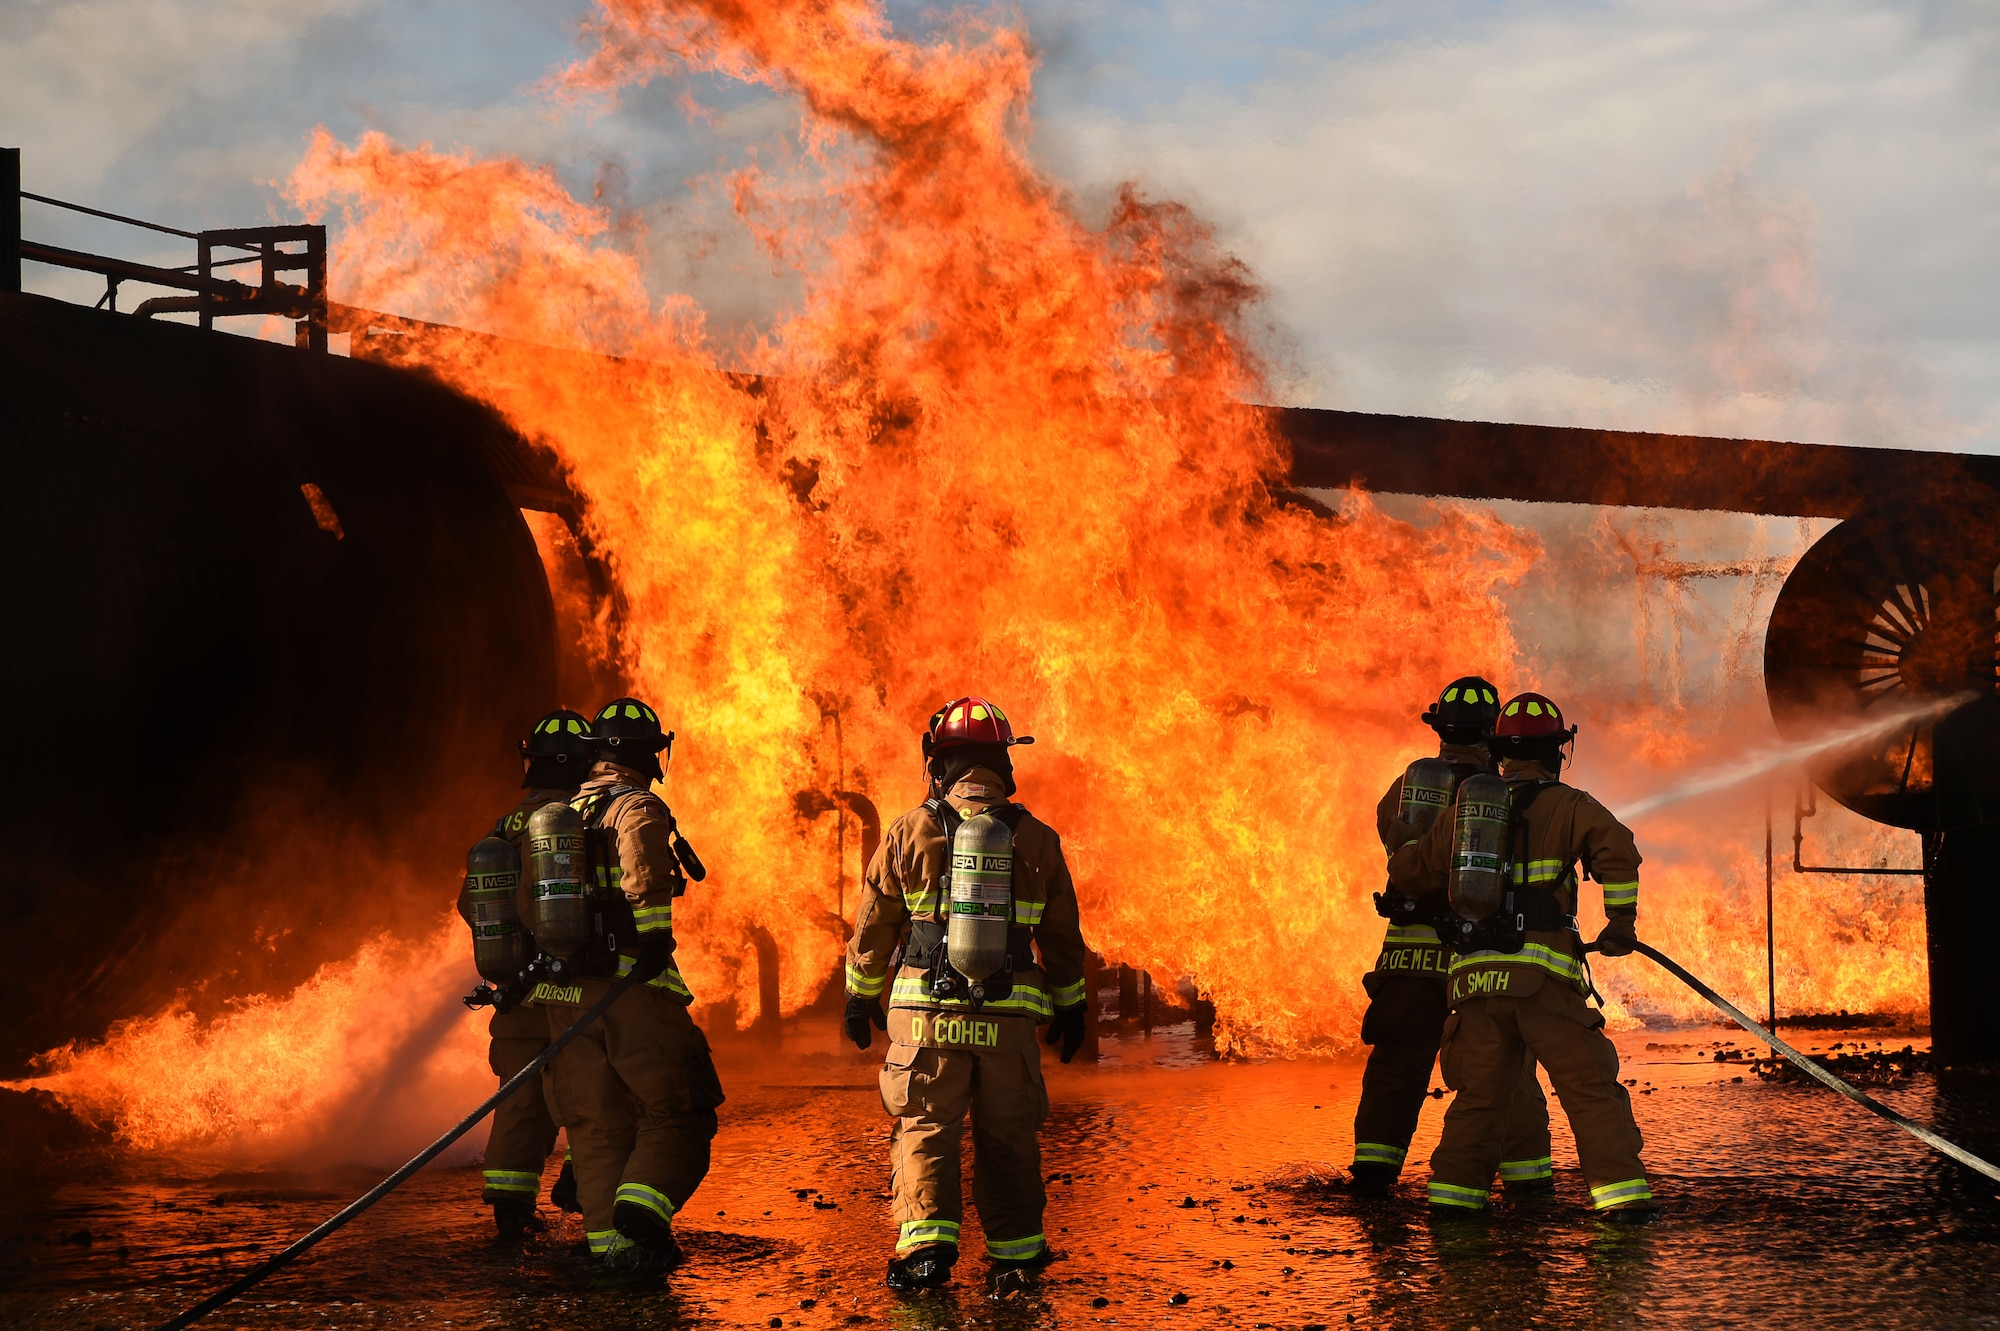 Nellis and Creech Airmen assigned to the 99th Civil Engineer Squadron Fire Protection Flight extinguish a controlled fire on the exterior of a mockup aircraft March 23, 2017, at Nellis Air Force Base, Nev. The team extinguished both the exterior and interior of the aircraft and was evaluated on the team’s ability to work together to meet training objectives. (U.S. Air Force photo/Airman 1st Class James Thompson) 